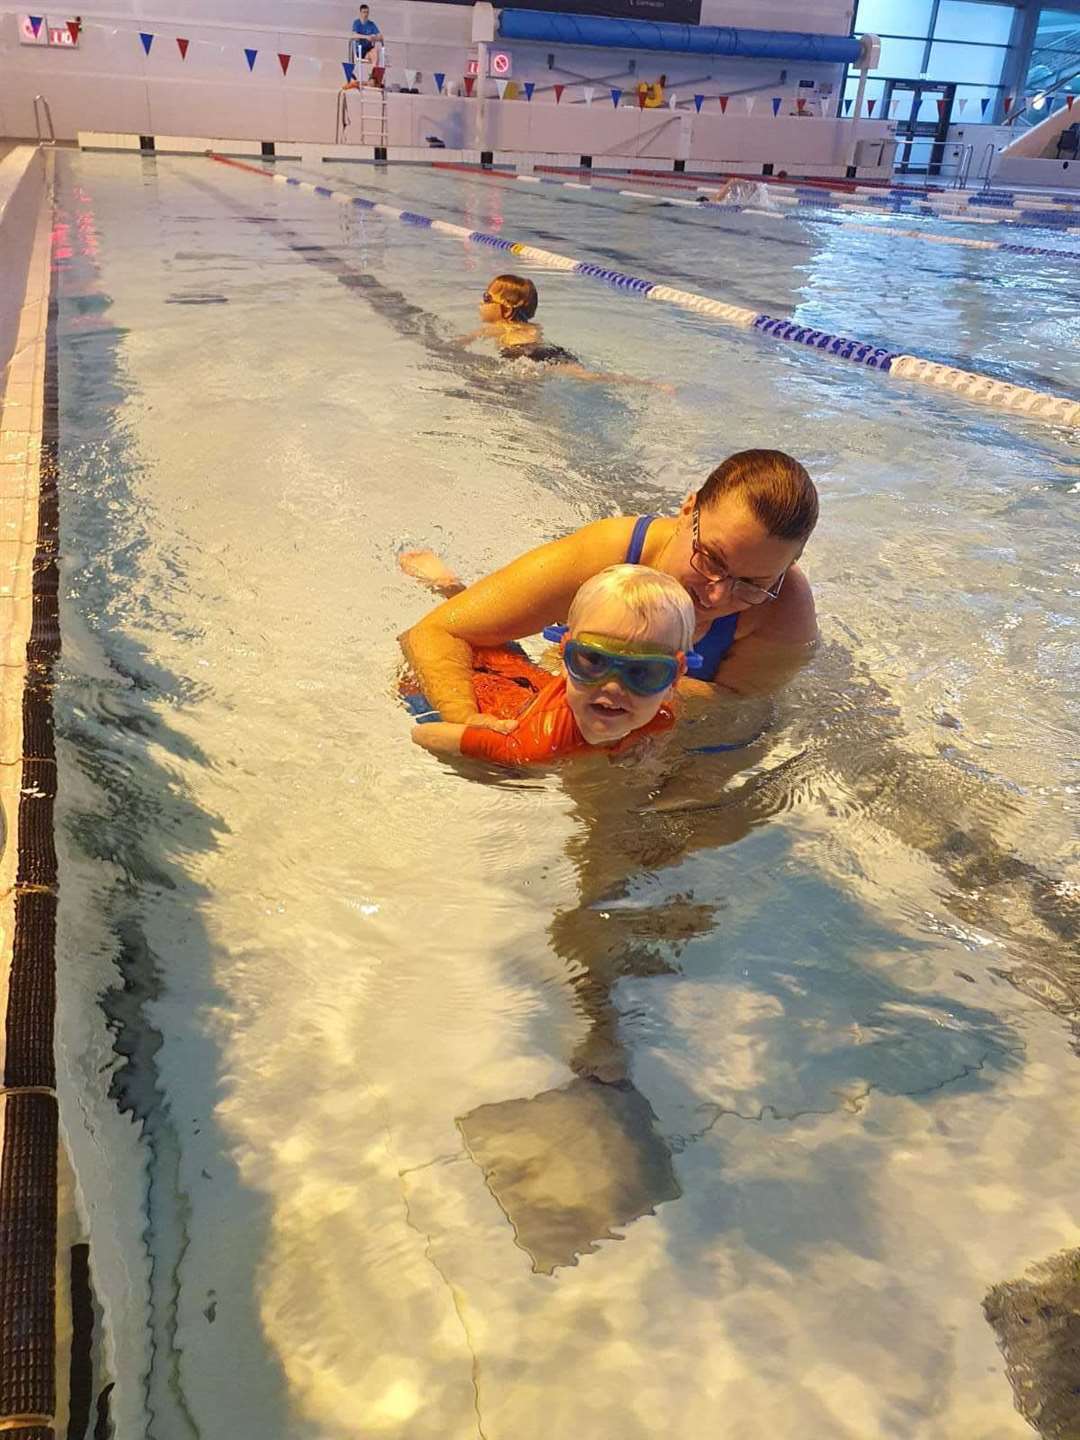 Little Fergus powers up the pool with some help from his mum.